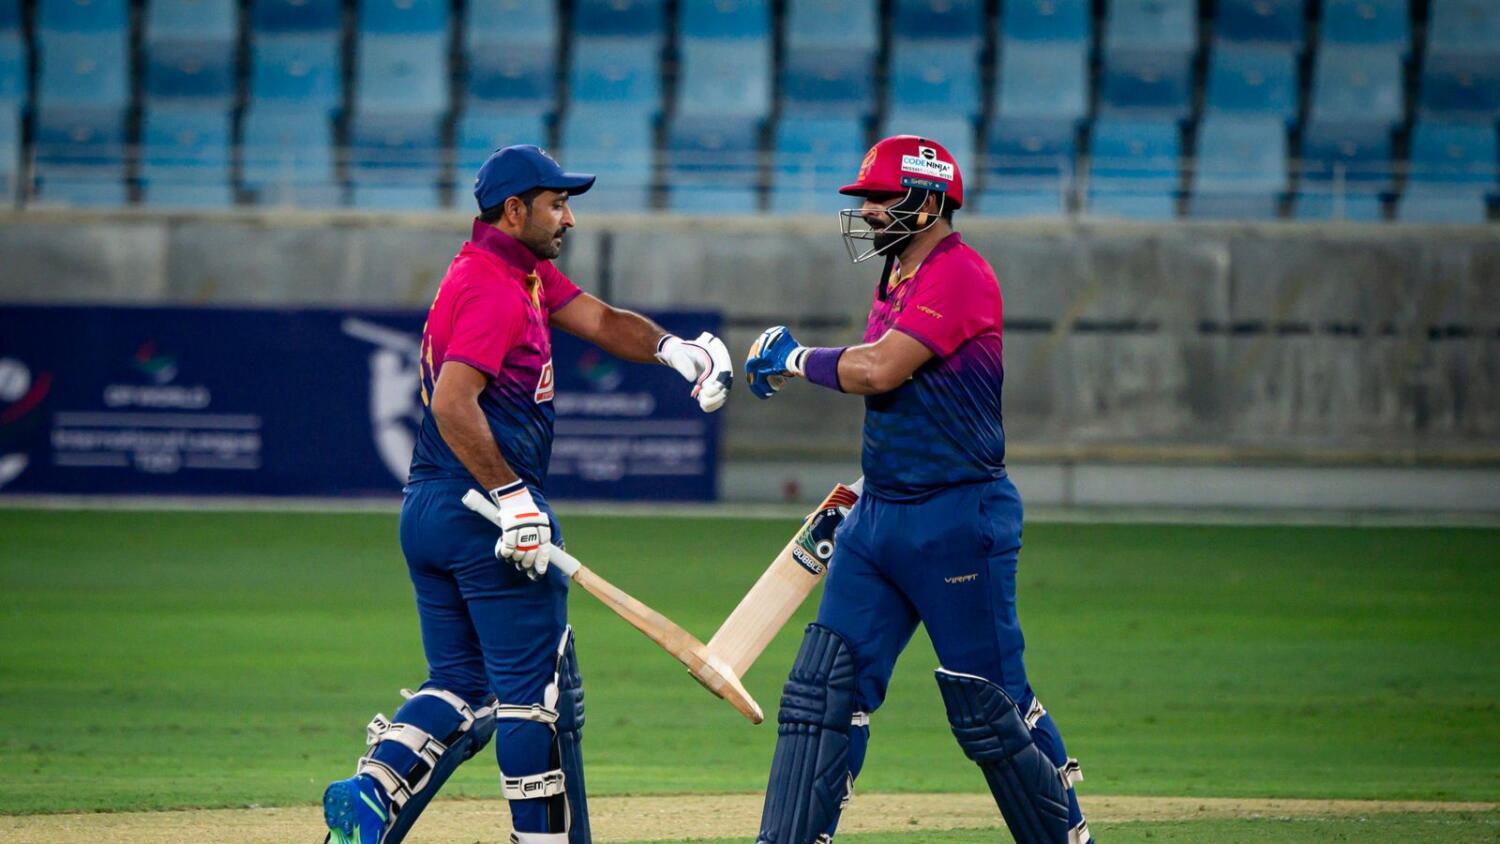 UAE's Muhammad Waseem and Asif Khan in action against New Zealand during the second T20I match at Dubai International Stadium on Saturday